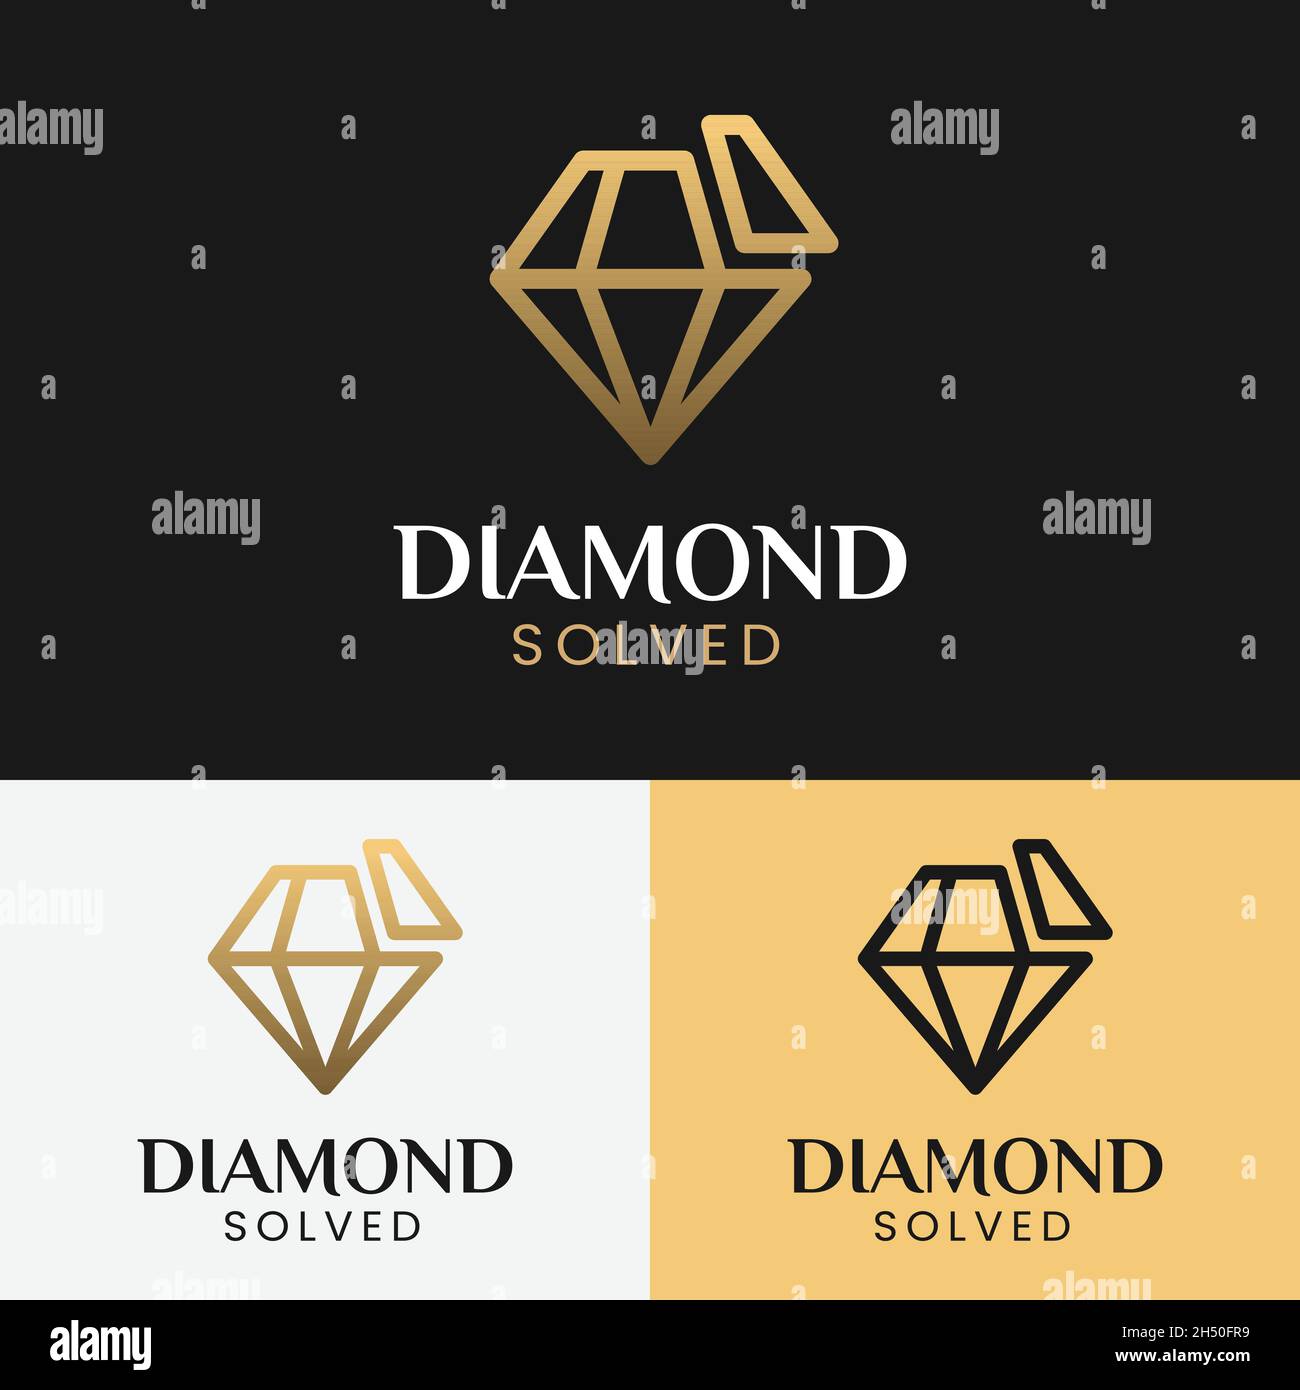 Diamond Solved in Line Style Logo Design Template. Suitable for Jewelry Jewellery Fashion Boutique Apparel Shop Store Business Brand Company Logo. Stock Vector